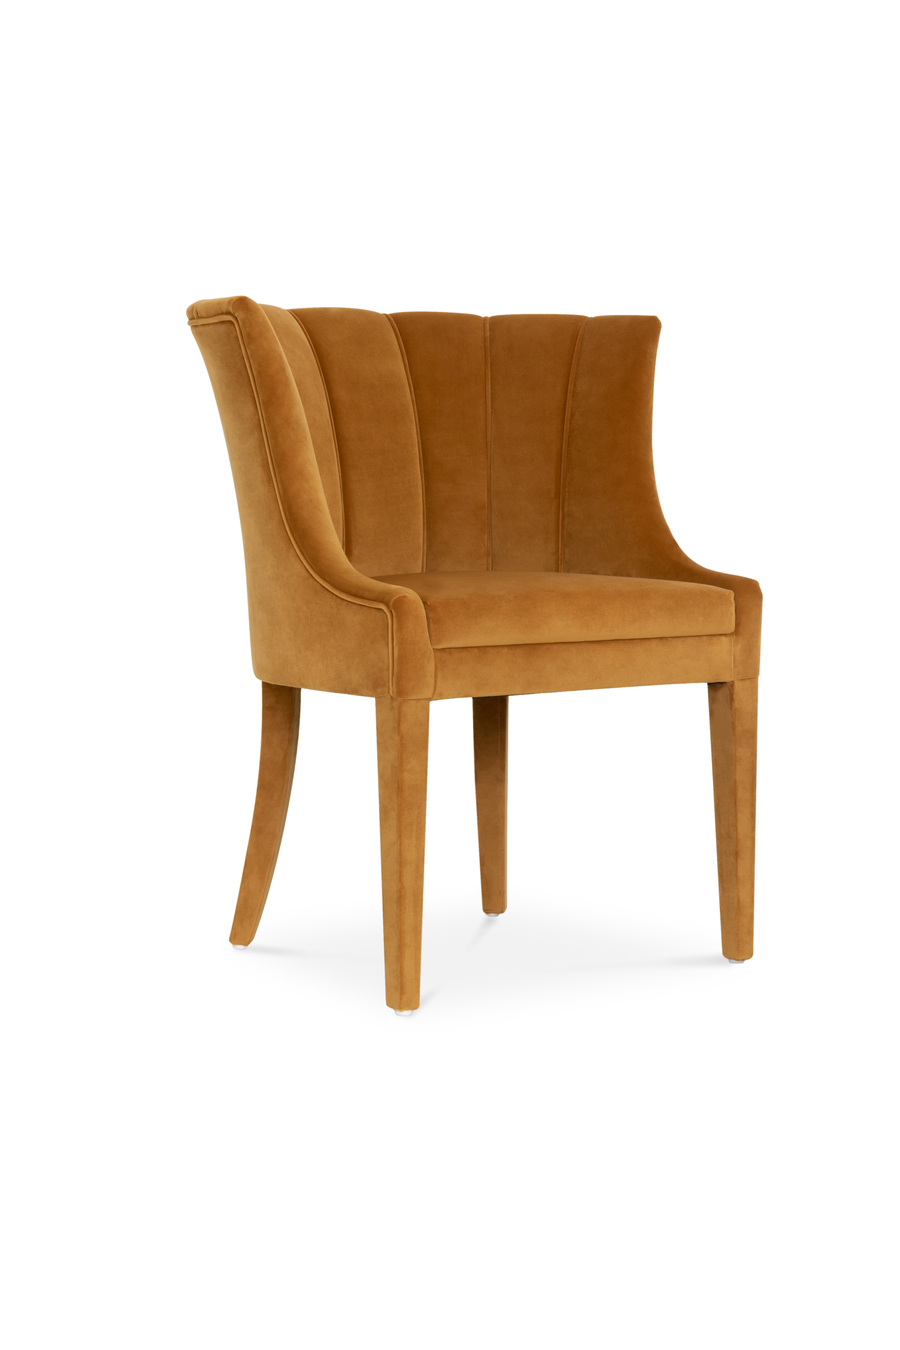 charming curved dining chair